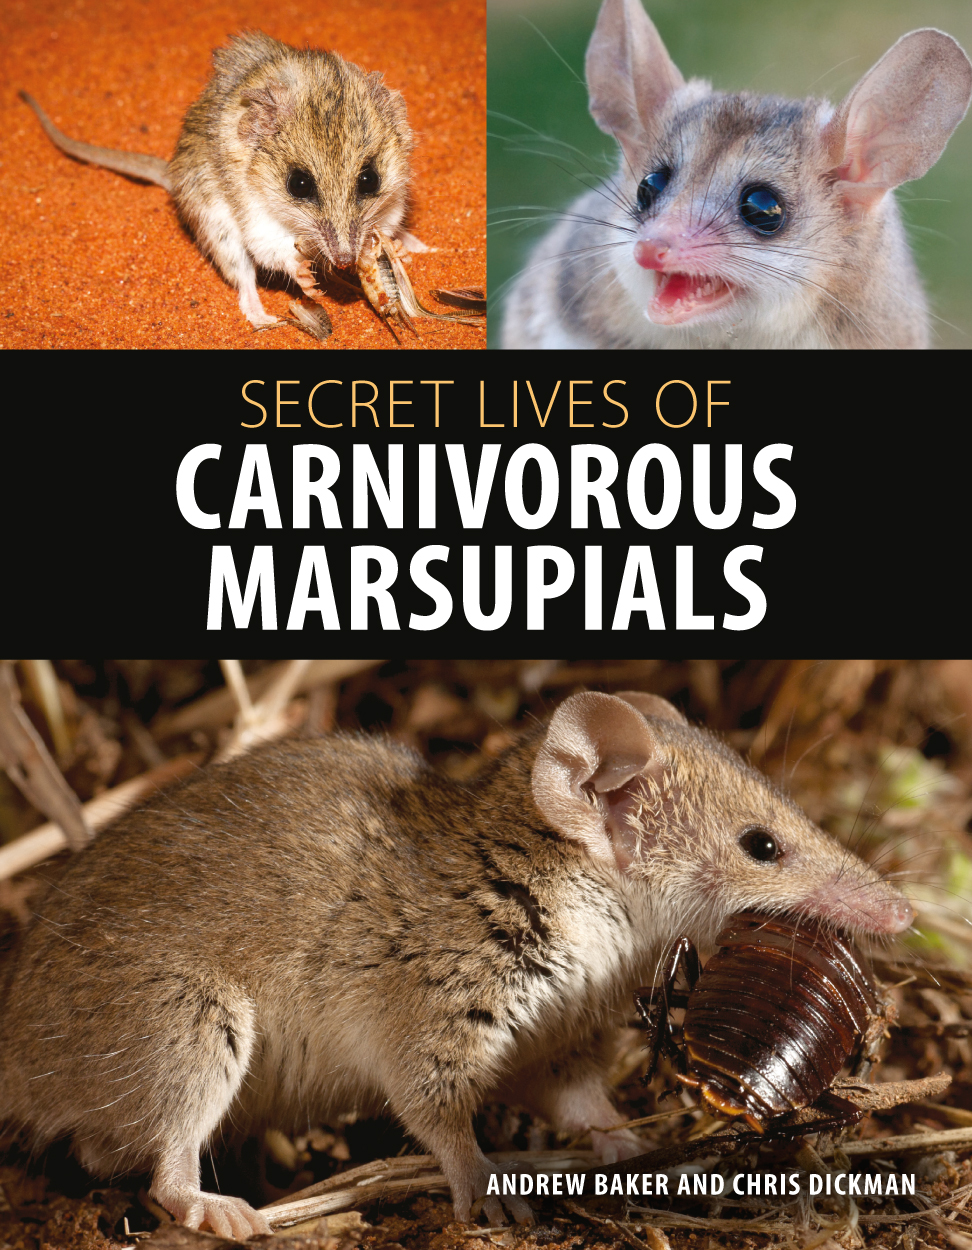 Cover of Secret Lives of Carnivorous Marsupials featuring three small marsupials, one with bared teeth